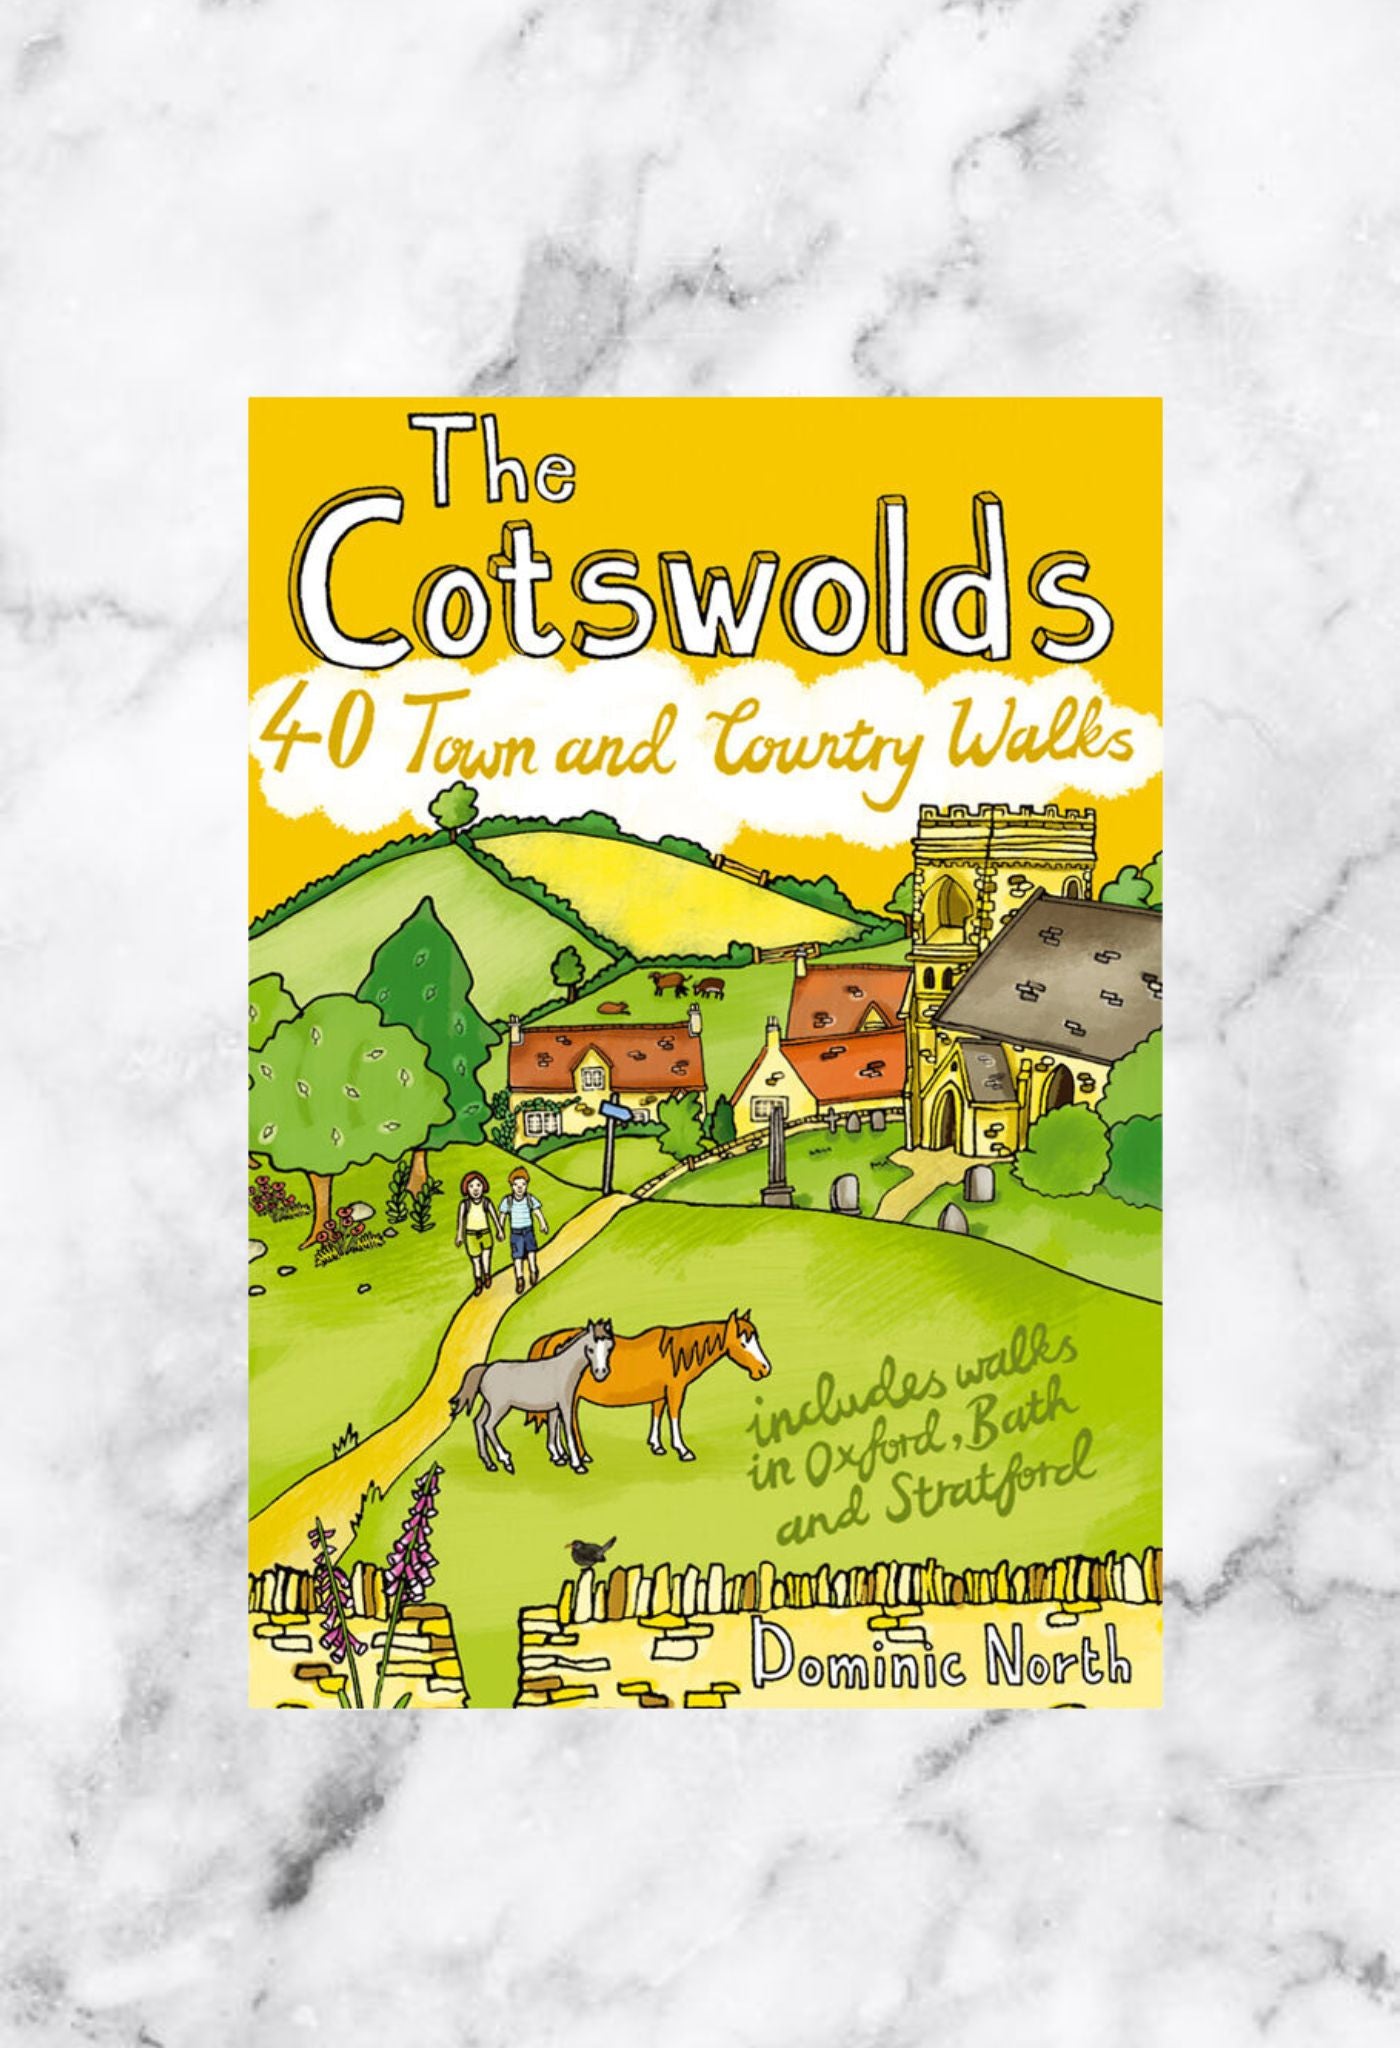 40 Walks in the Cotswolds Guide